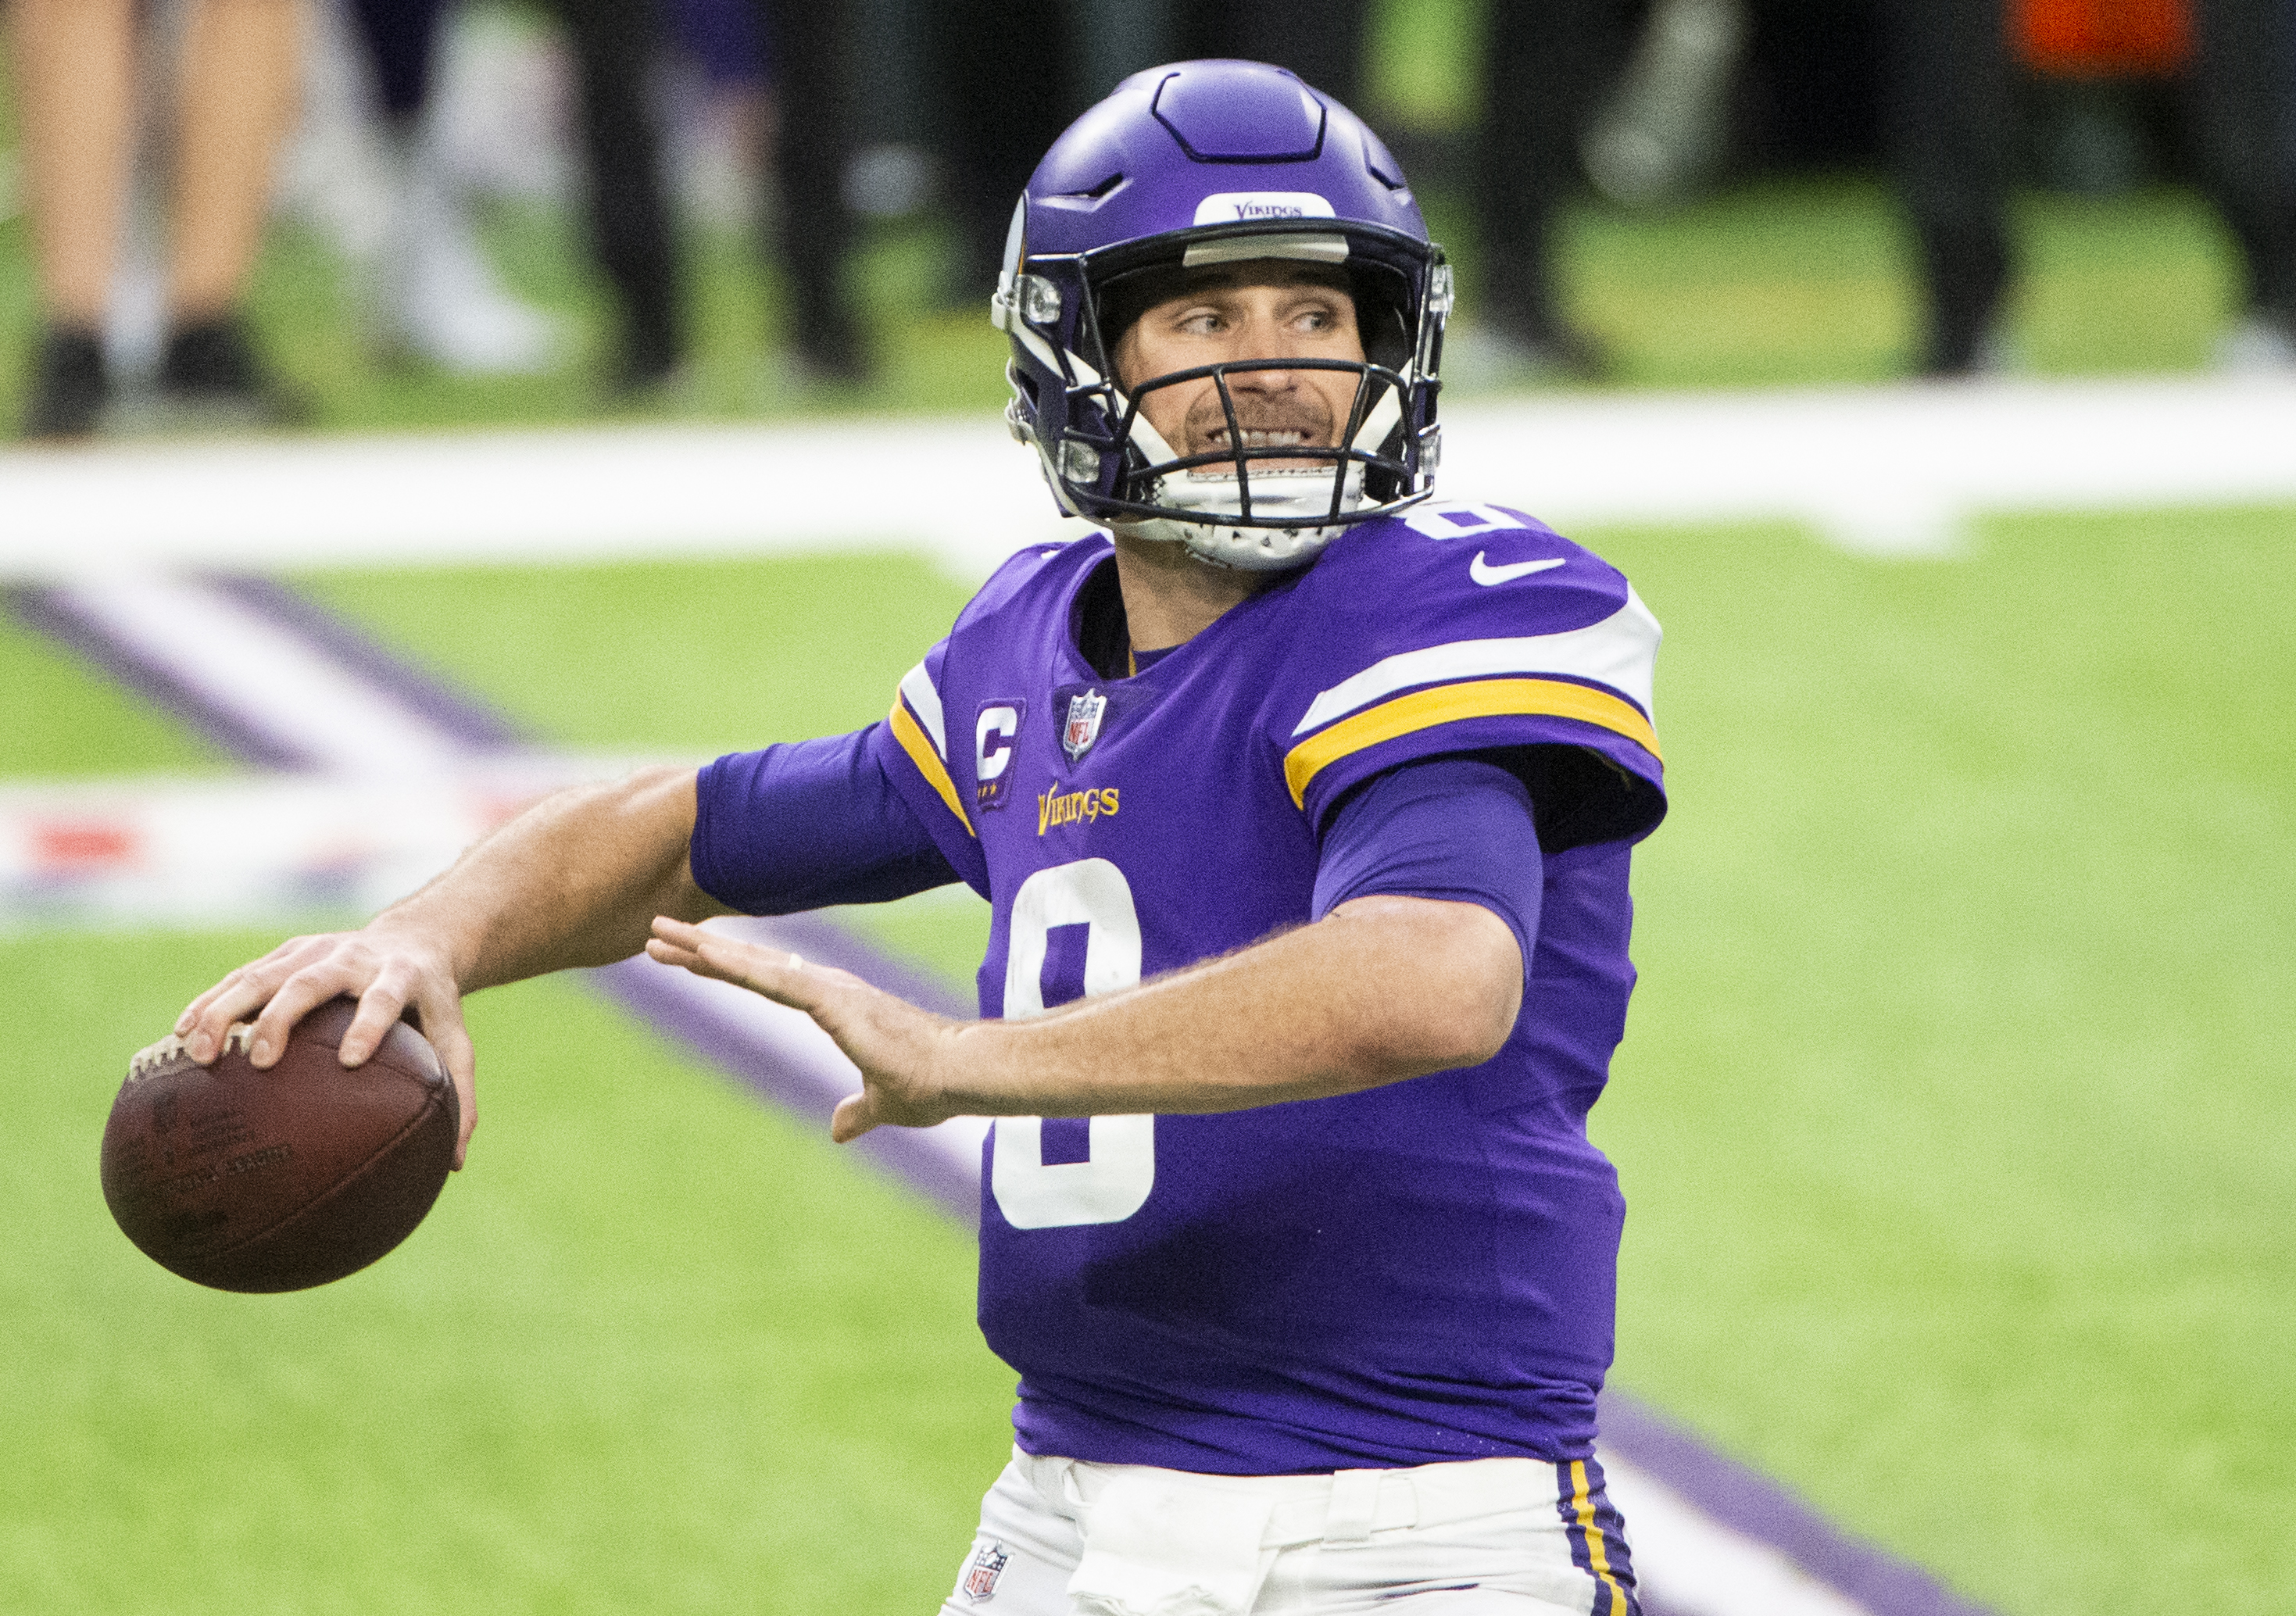 Kirk Cousins #8 of the Minnesota Vikings passes the ball in the fourth quarter of the game against the Chicago Bears at U.S. Bank Stadium on December 20, 2020 in Minneapolis, Minnesota.